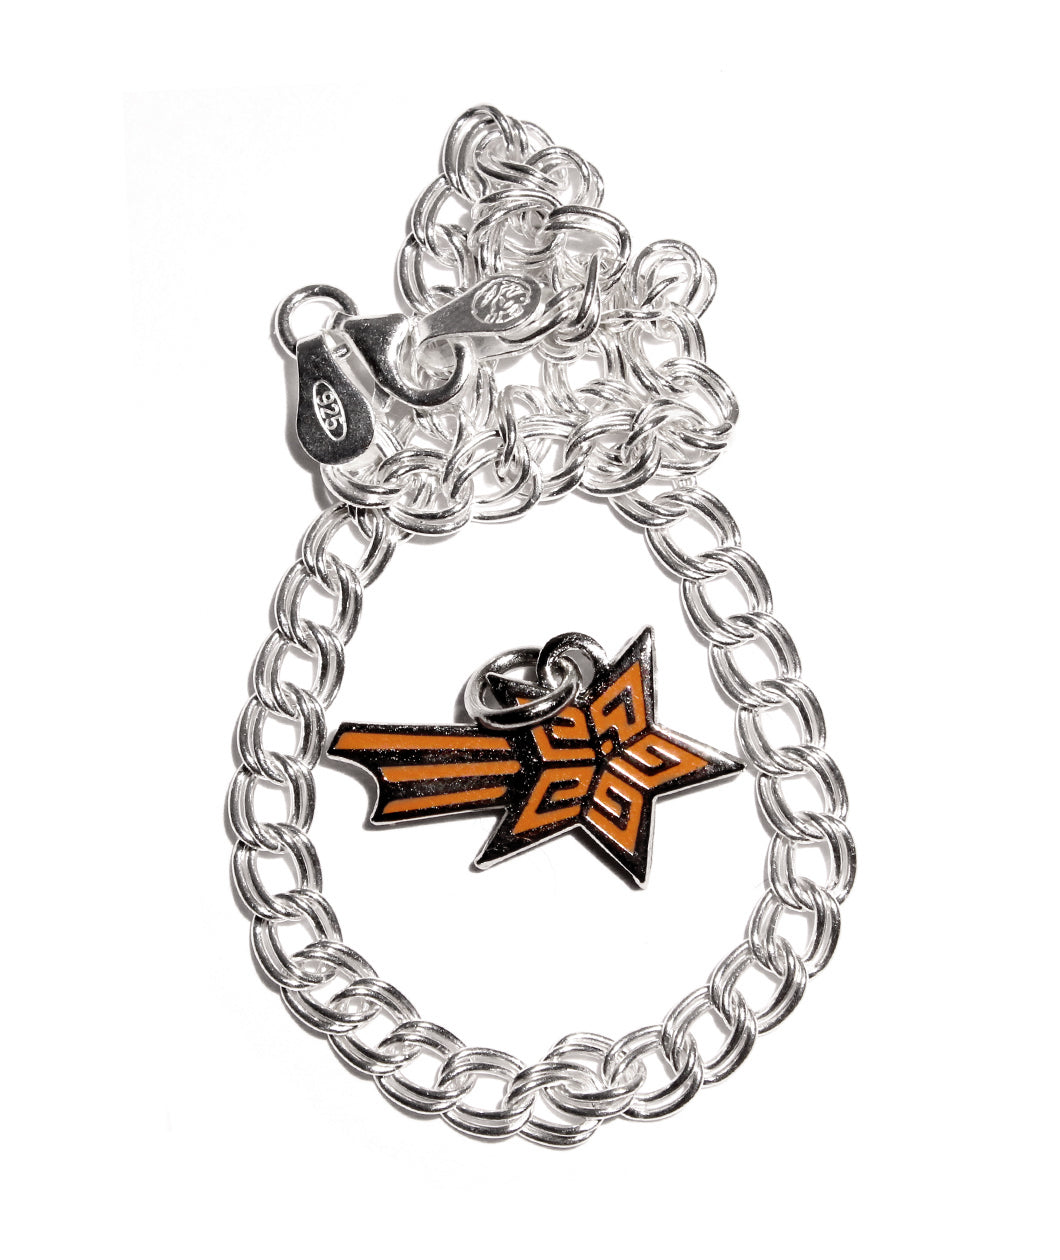 A sterling silver chain bracelet circling around an orange star with three orange lines trailing behind it on a silver backing - from This Star Won’t Go Out.